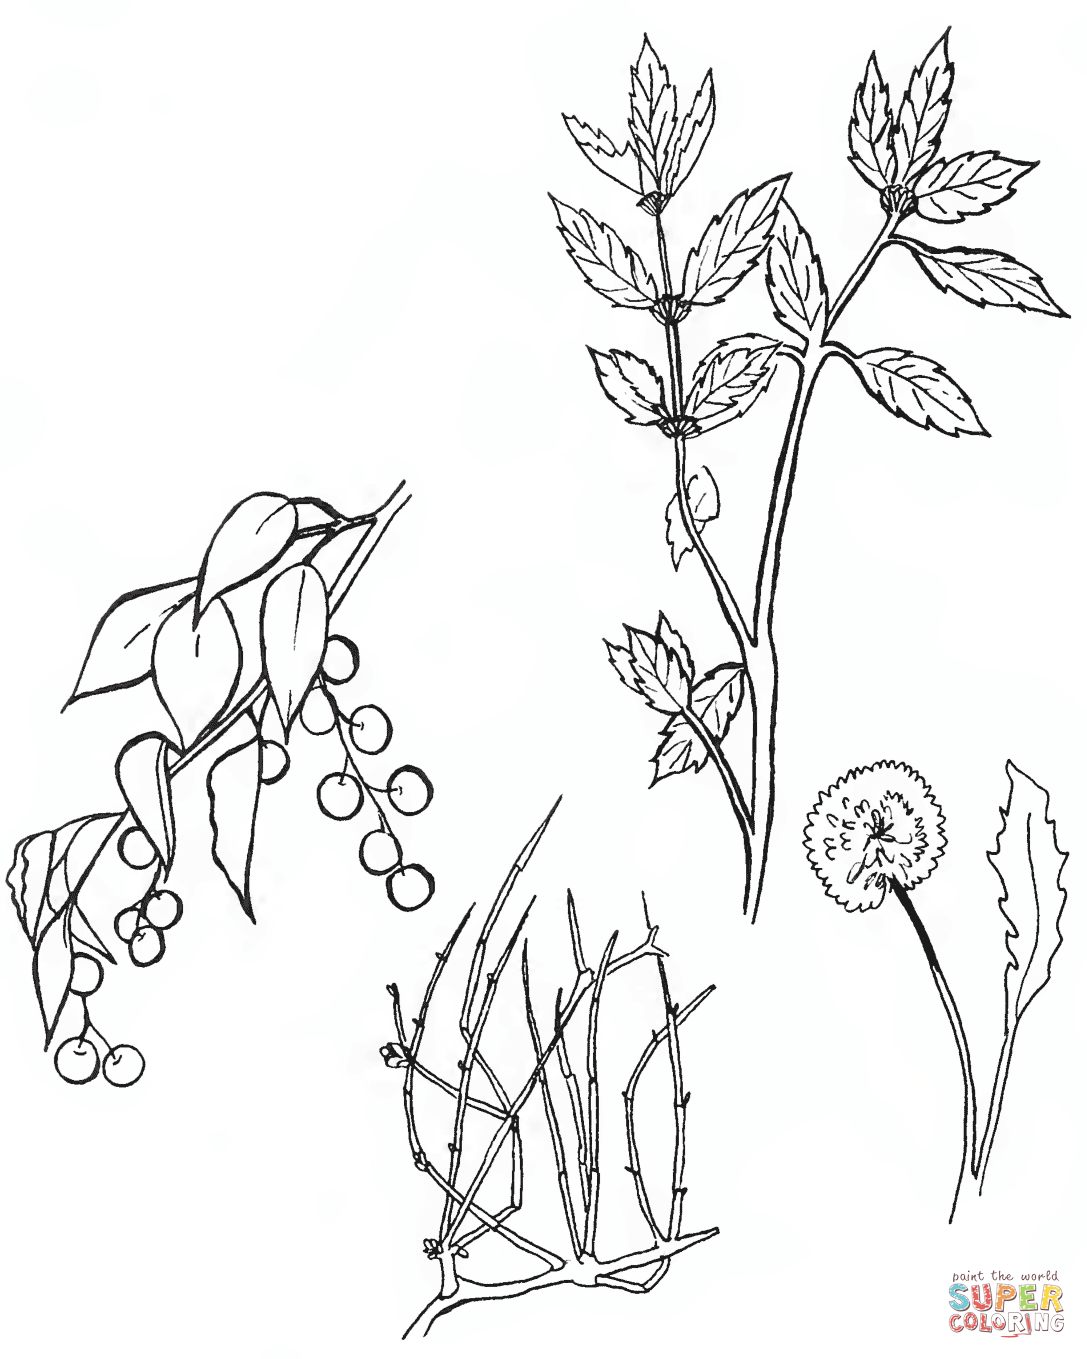 North American Plants coloring page | Free Printable Coloring Pages